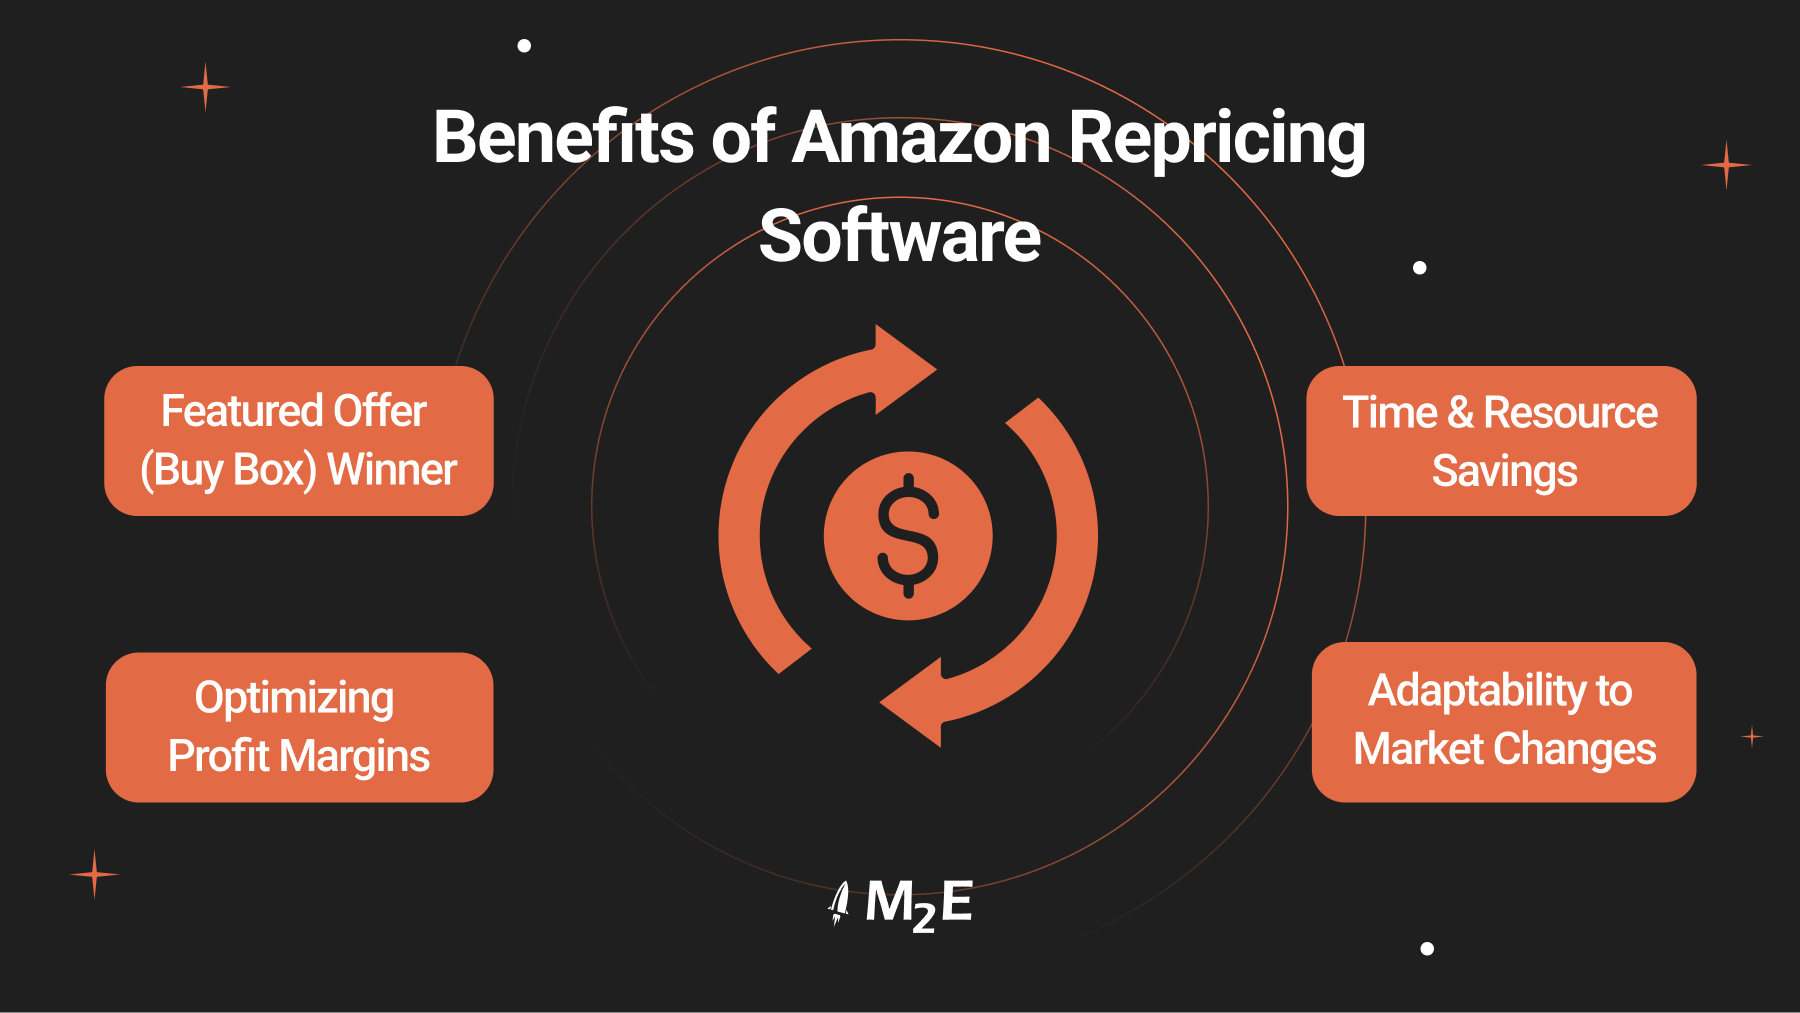 Benefits of Amazon Repricing Software